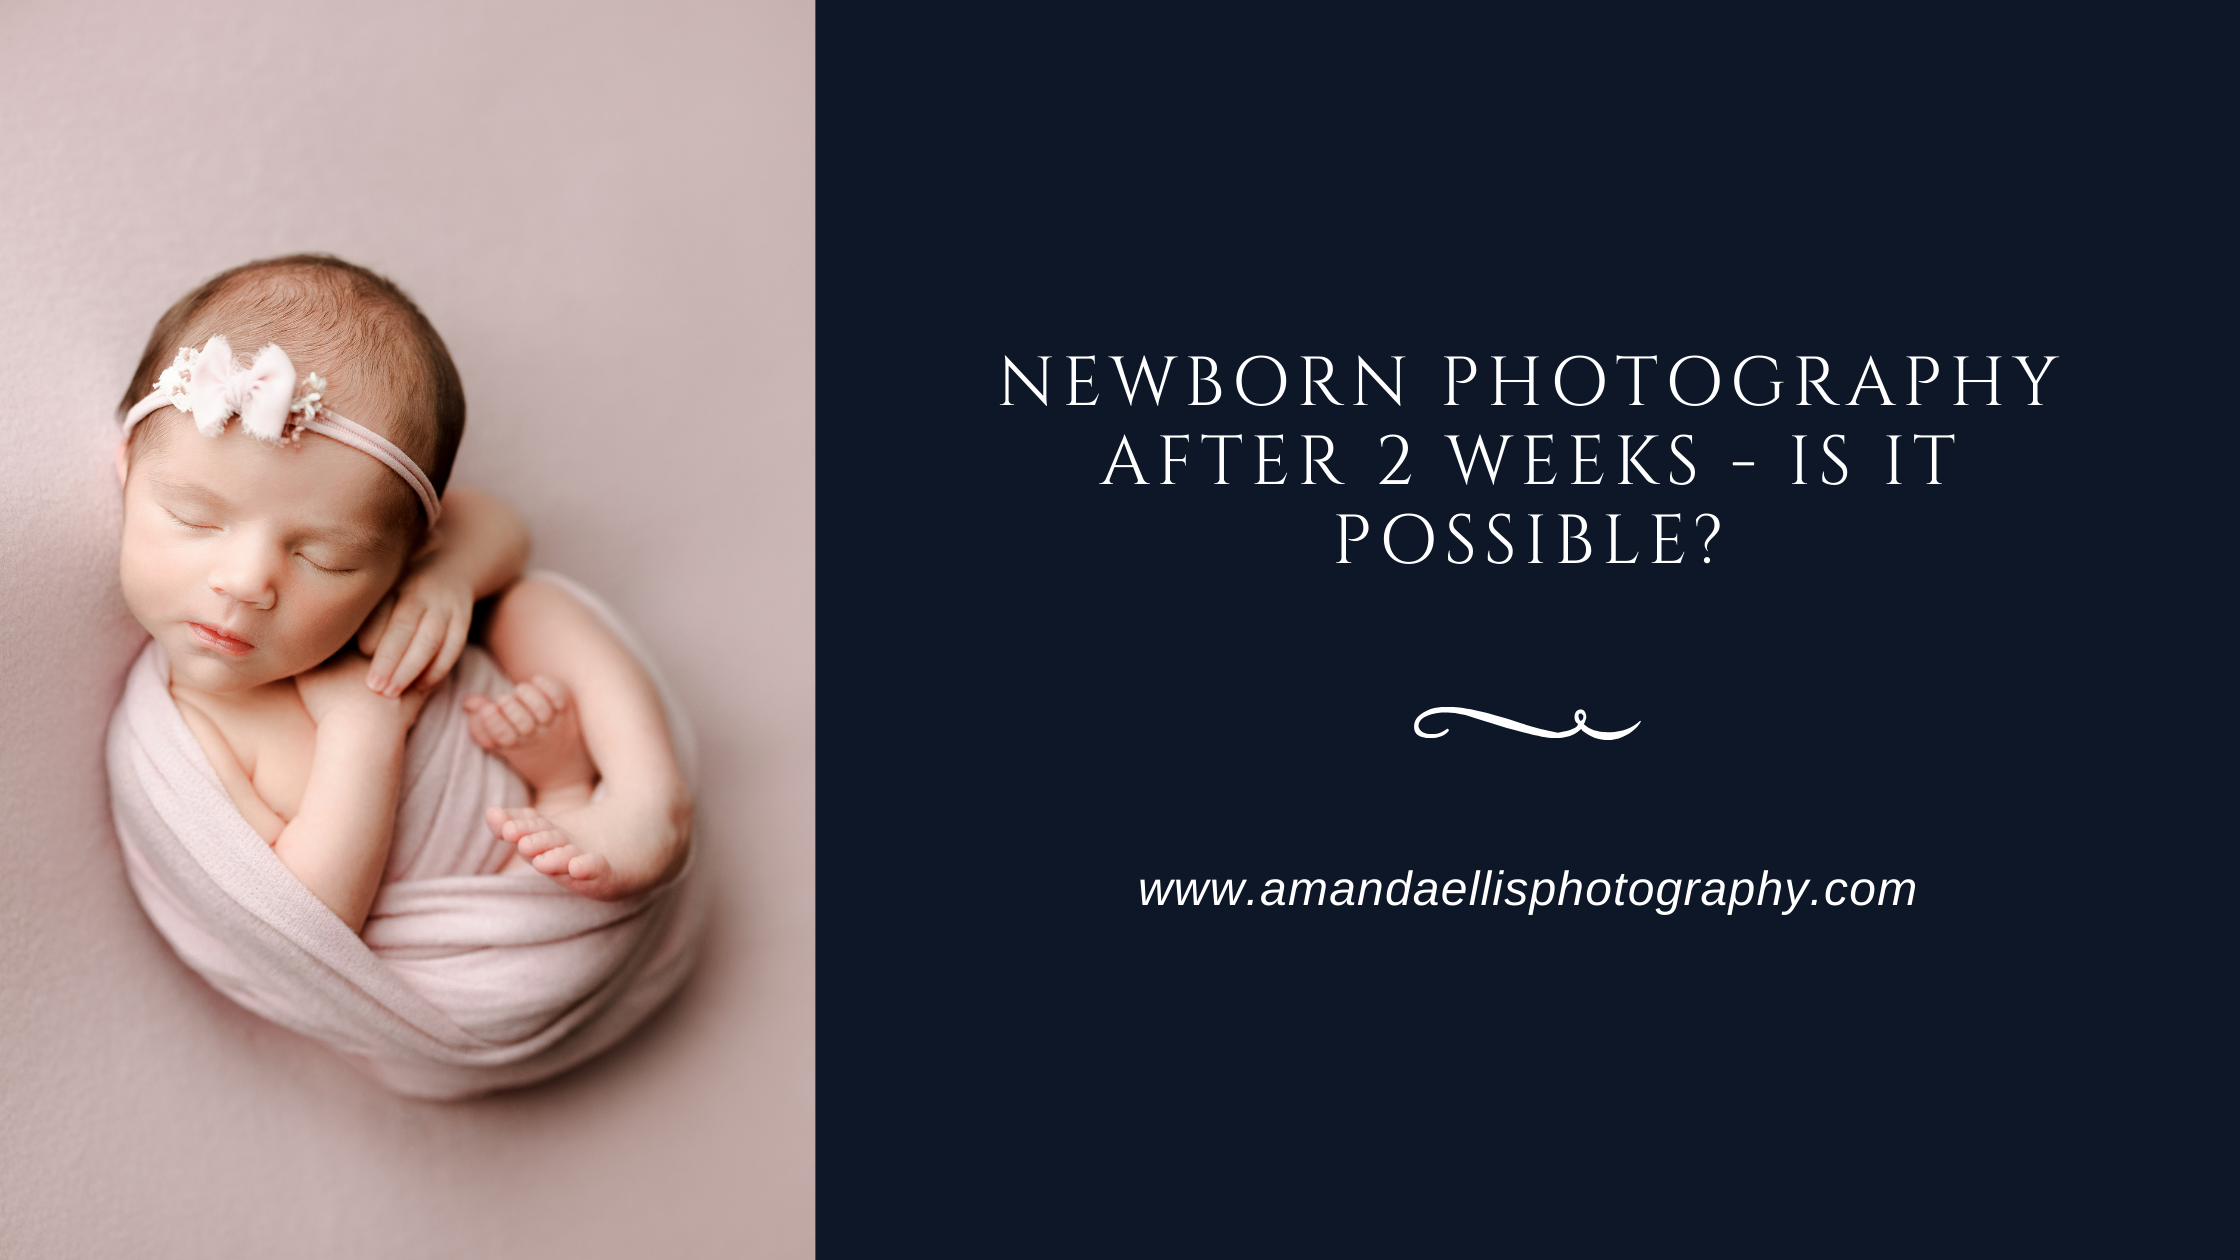 NEWBORN PHOTOGRAPHY AFTER 2 WEEKS - IS IT POSSIBLE?